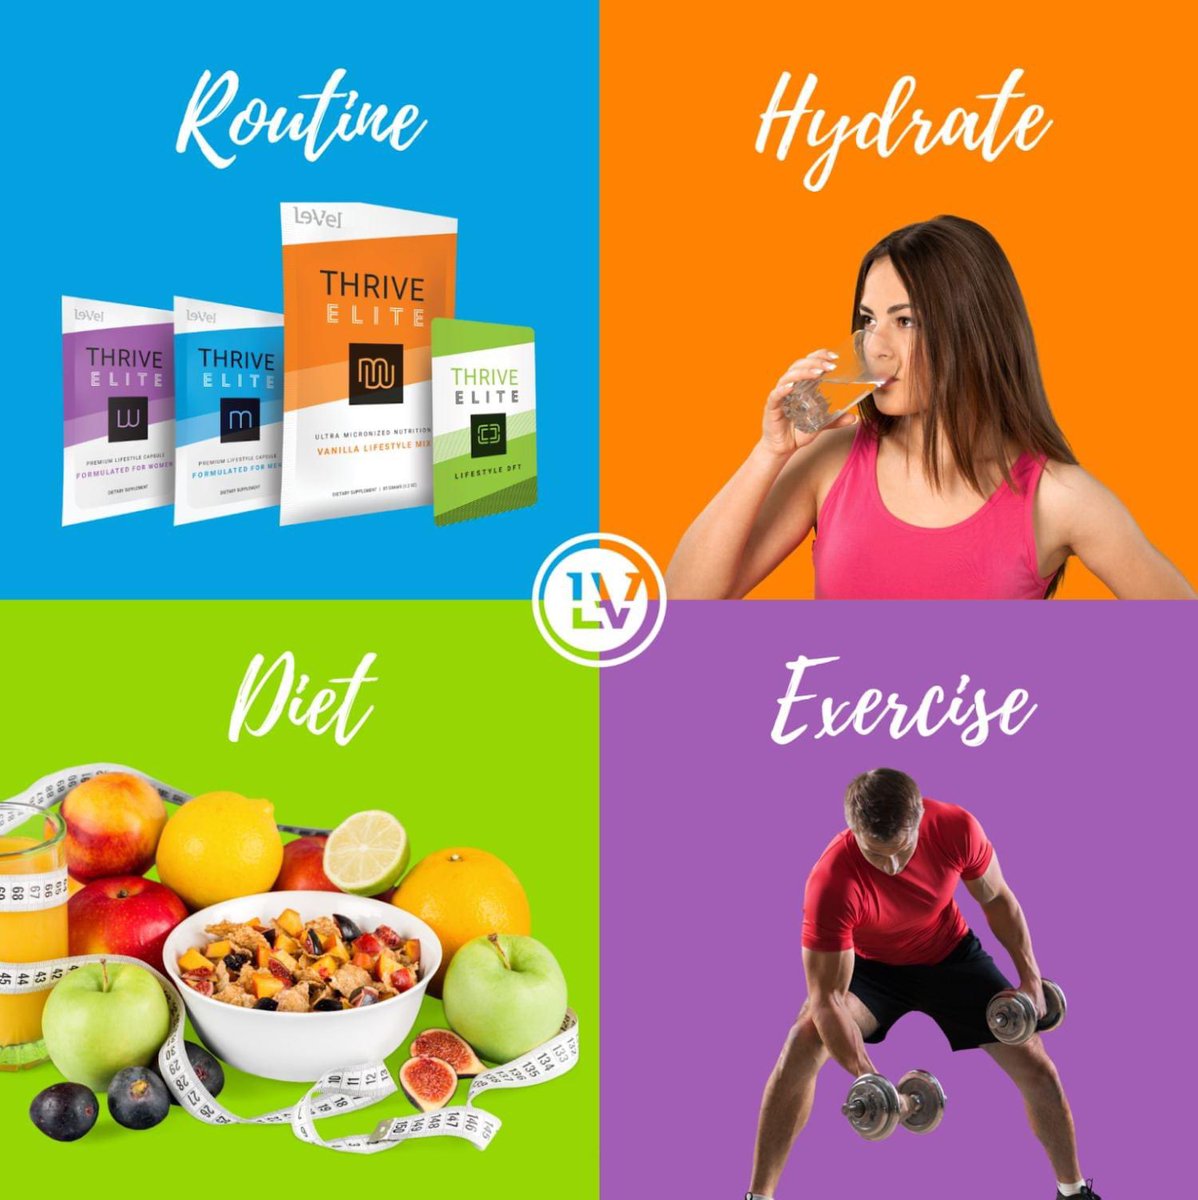 The perfect daily routine for reaching peak health levels: 
💚 Thrive’s #3SimpleSteps 
💦 Cut the sugary drinks & stay hydrated with water
🥗 Healthy, nutritious meals 
🏋️ A workout a day to keep the doctor away
ravsam.le-vel.com/Products